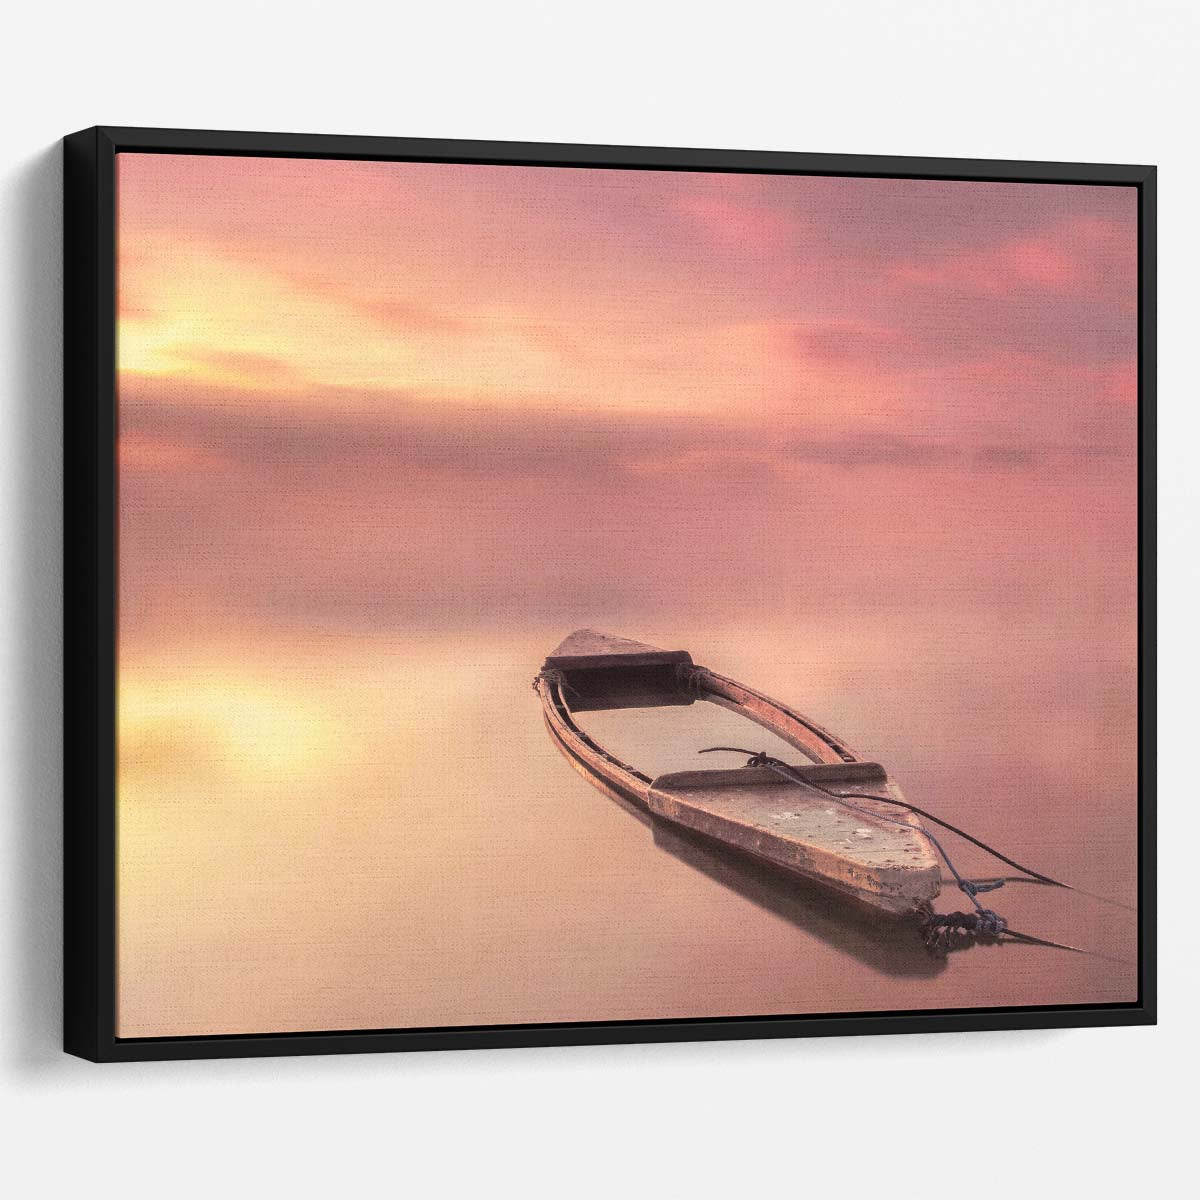 Sunrise Seascape Abandoned Boat in Tarragona Wall Art by Luxuriance Designs. Made in USA.